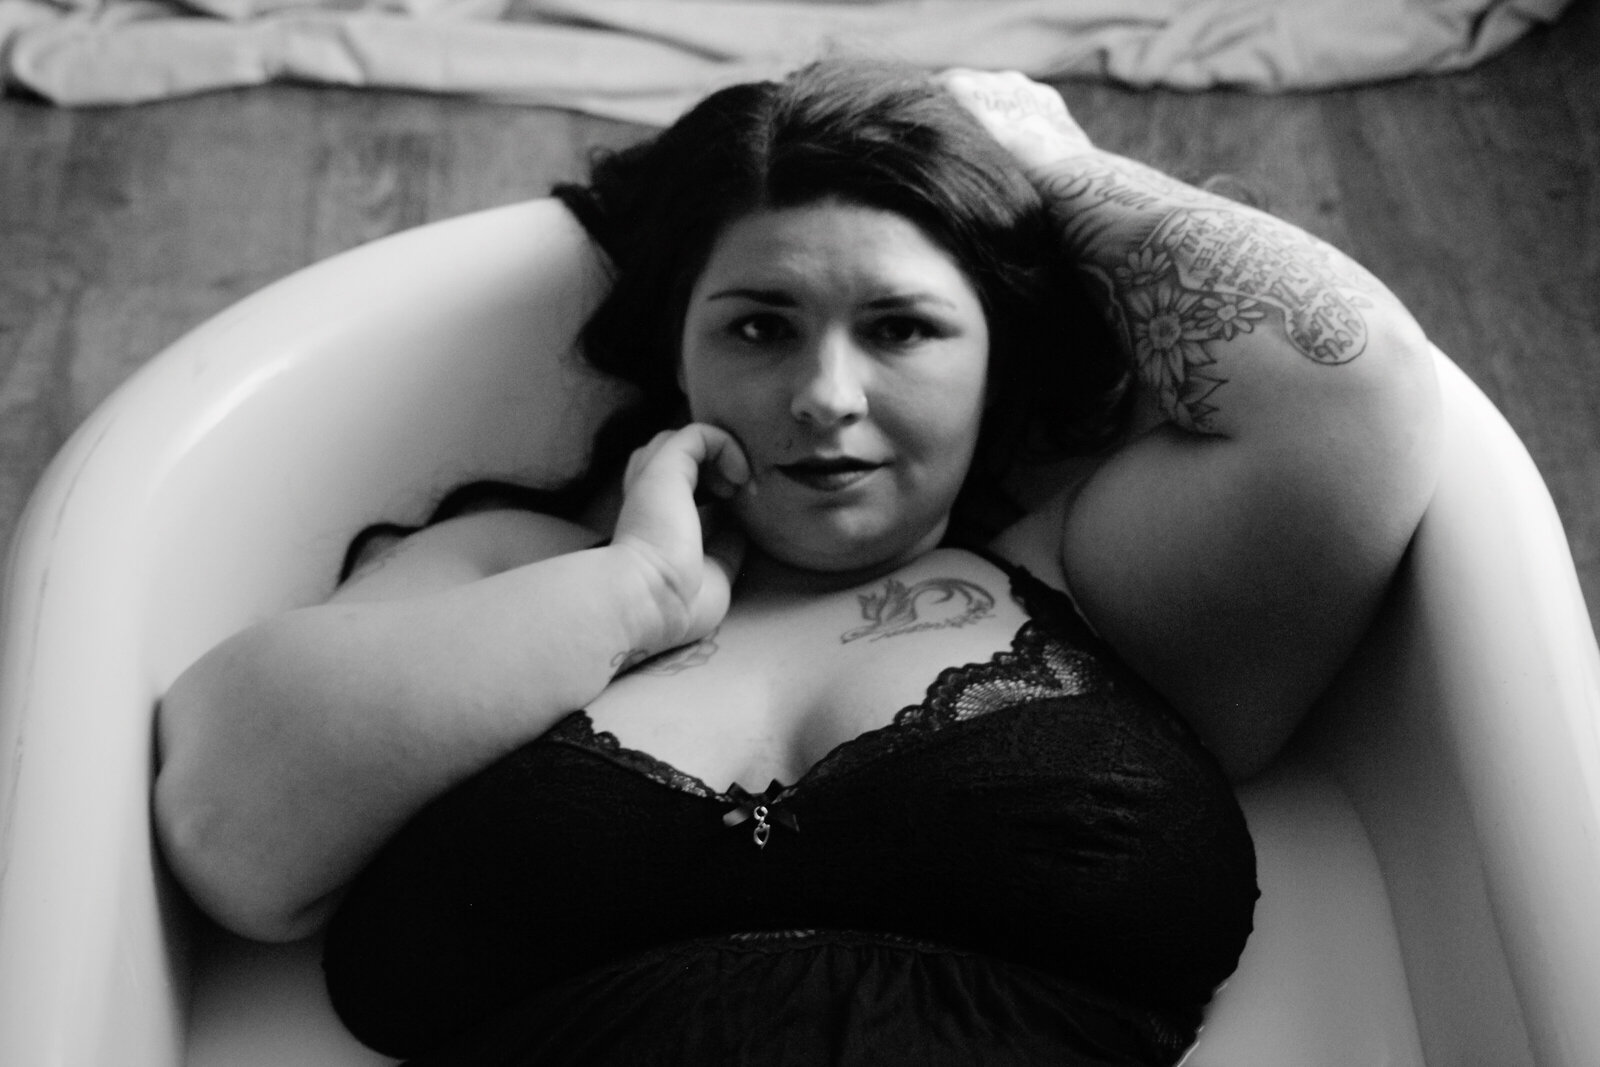 Tattoo, young mother, milk bath, lingerie